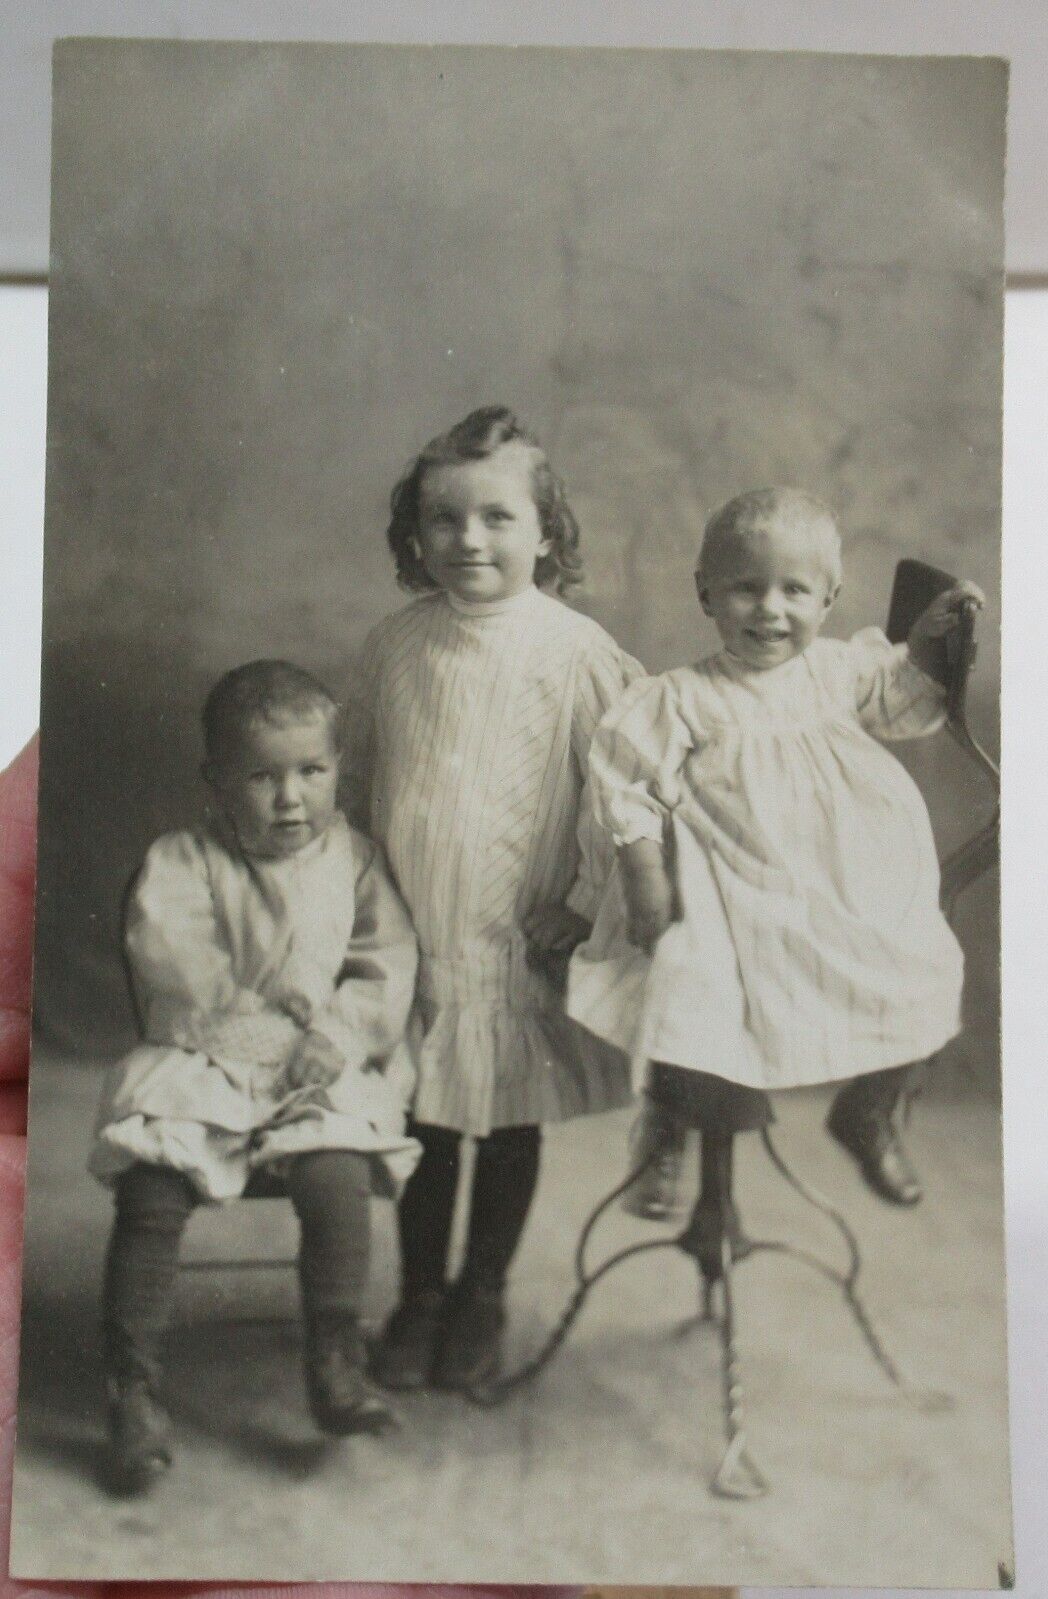 CHILDREN - Sidney MT - 1910 - real photo - POST CARD - listing # 3760